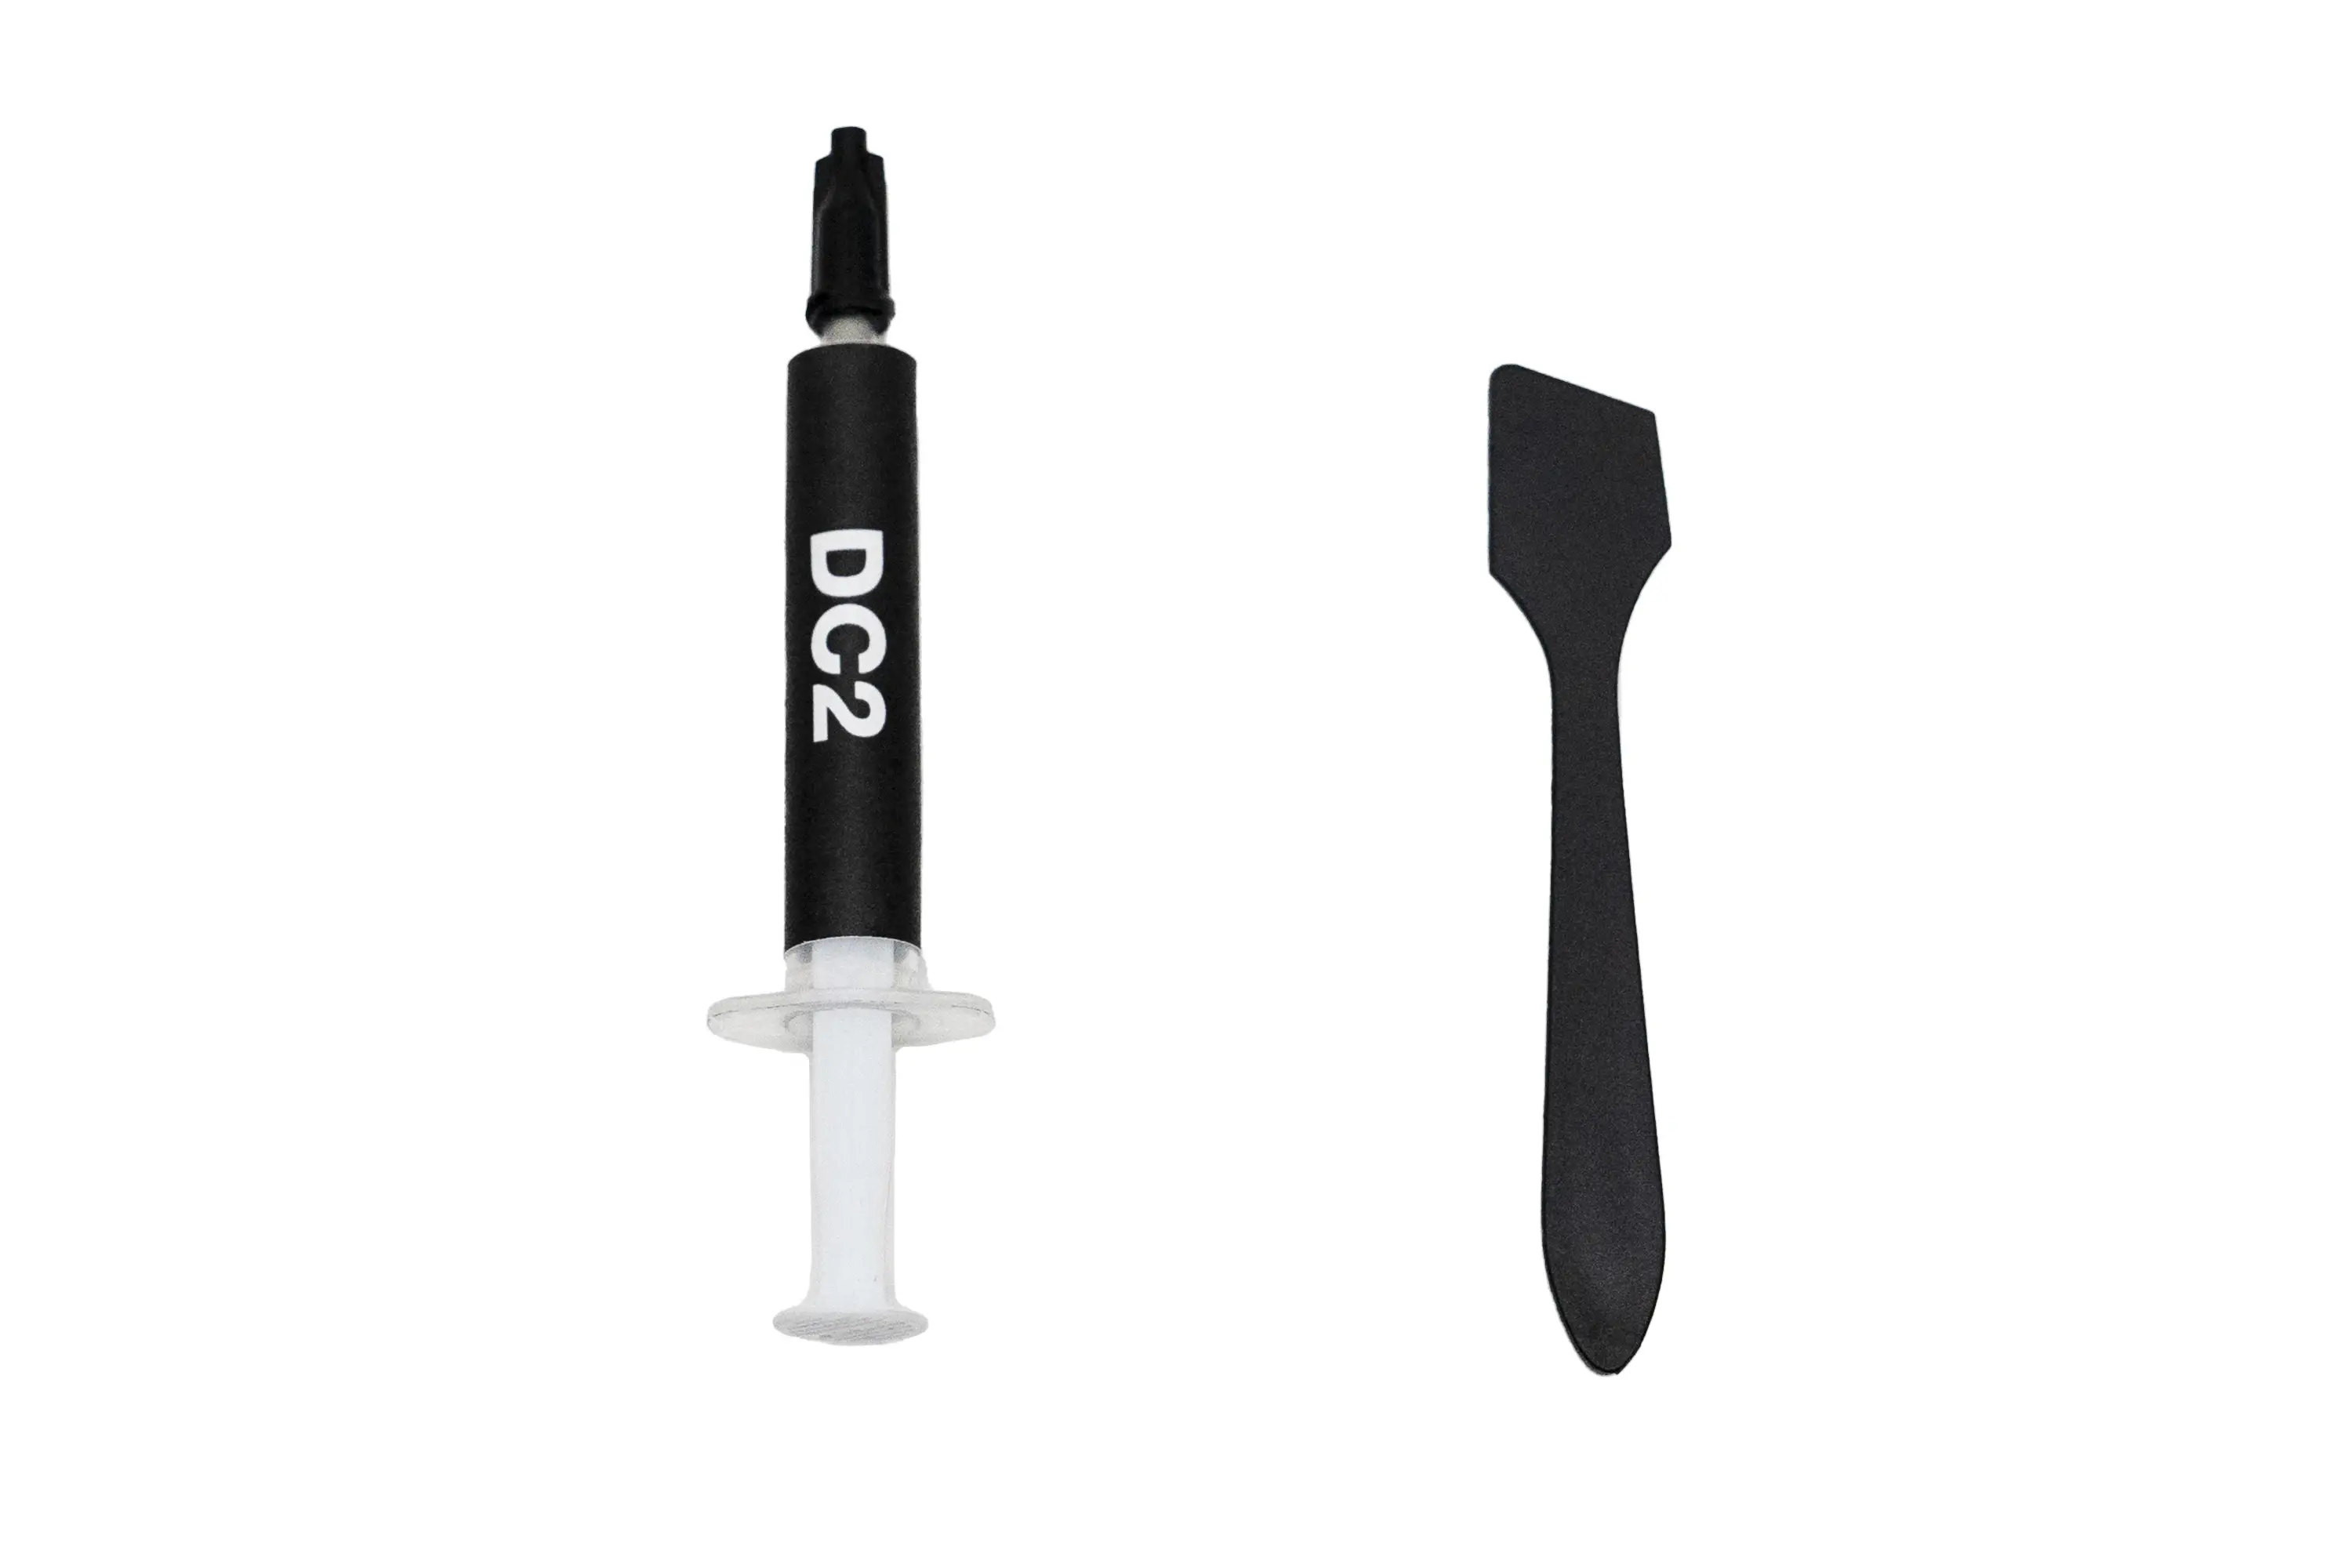 be quiet! Thermal Grease DC2, Thermal conductivity of 7.5W/mK, Temperature range of -20°C to +120°C, 3g - image 1